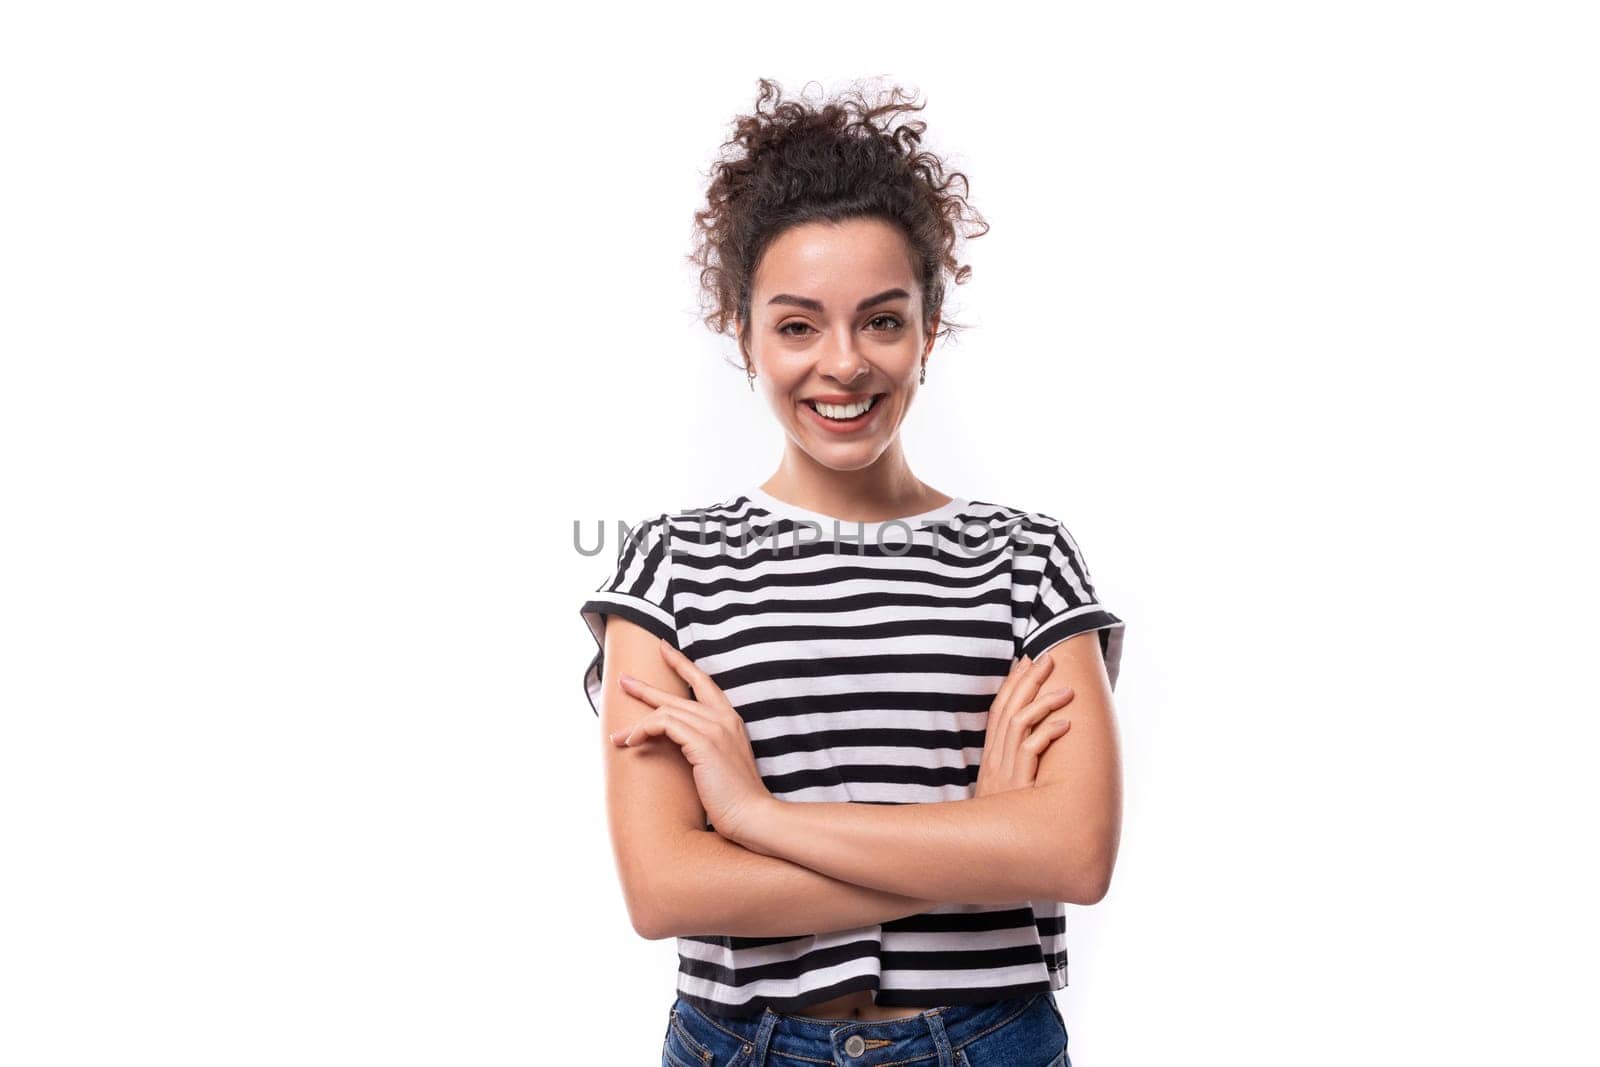 young caucasian woman with curly hair dressed in a striped summer t-shirt smiling against the background with copy space.